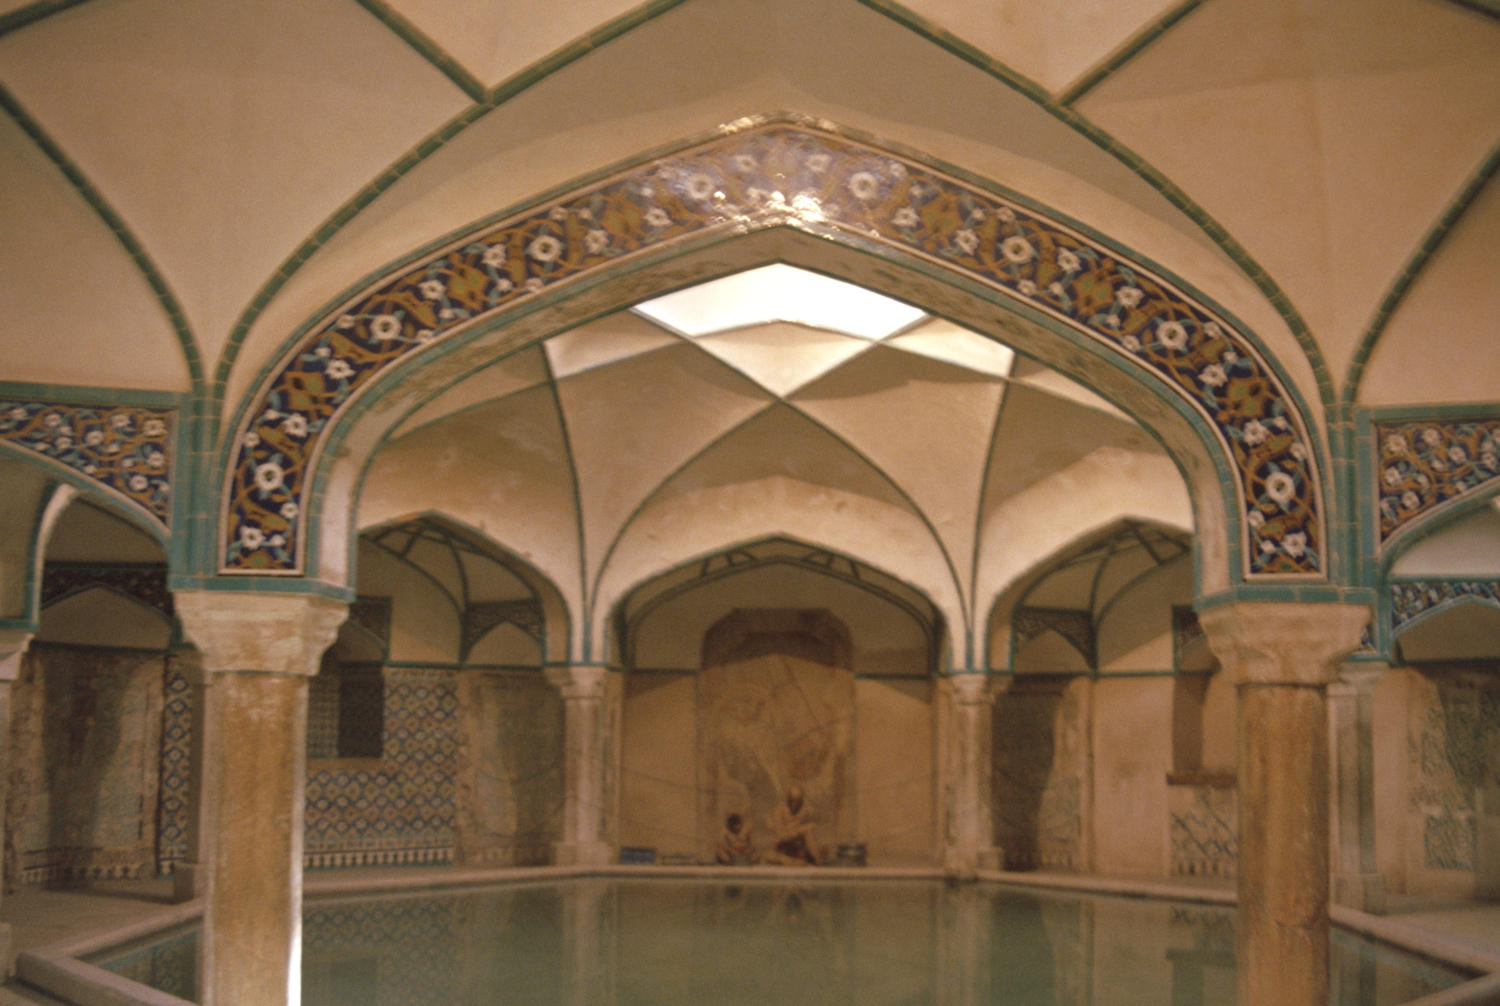 Interior view of the baths, central pool in hot room.